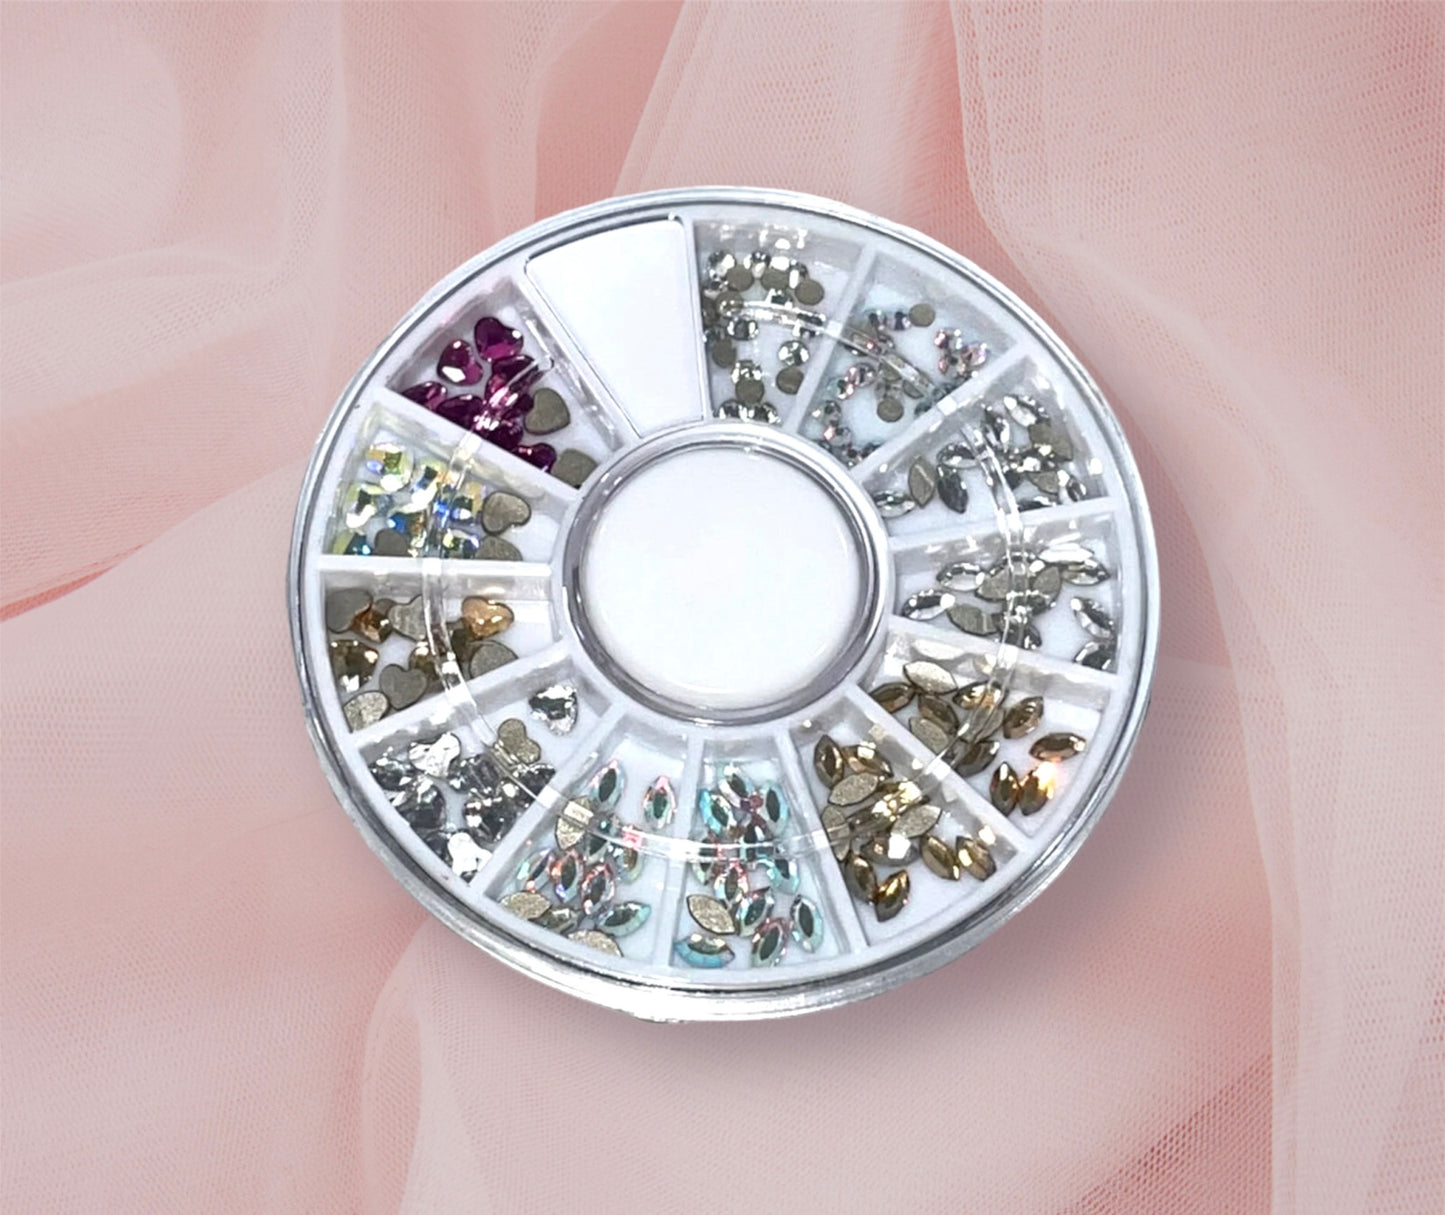 Assorted Advanced Crystal Swarovski Mini Tooth Gem Tray - Specialty Tooth Gems; Butterfly’s & Hearts (Lead Free)